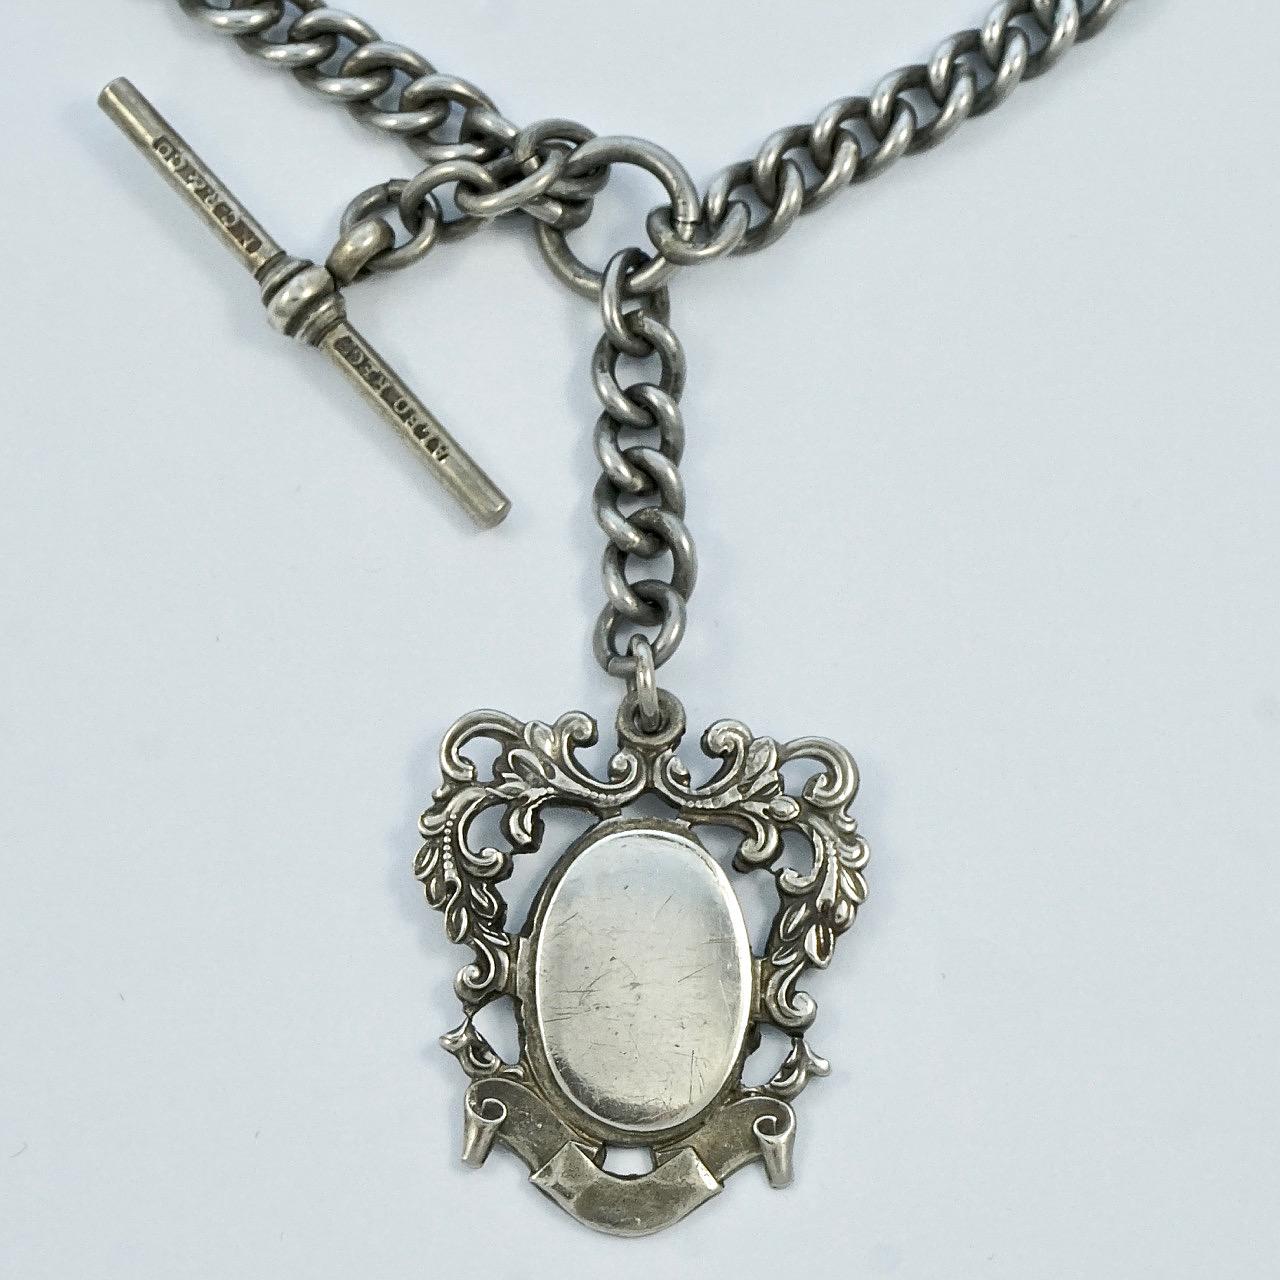 Antique Victorian silver tone double Albert watch chain, with a lovely decorative fob. Measuring length 37.8 cm / 14.88 inches. It is stamped NCR & Co for N C Reading & Co of Birmingham, England, and ALBO registered. 

This wonderful antique watch